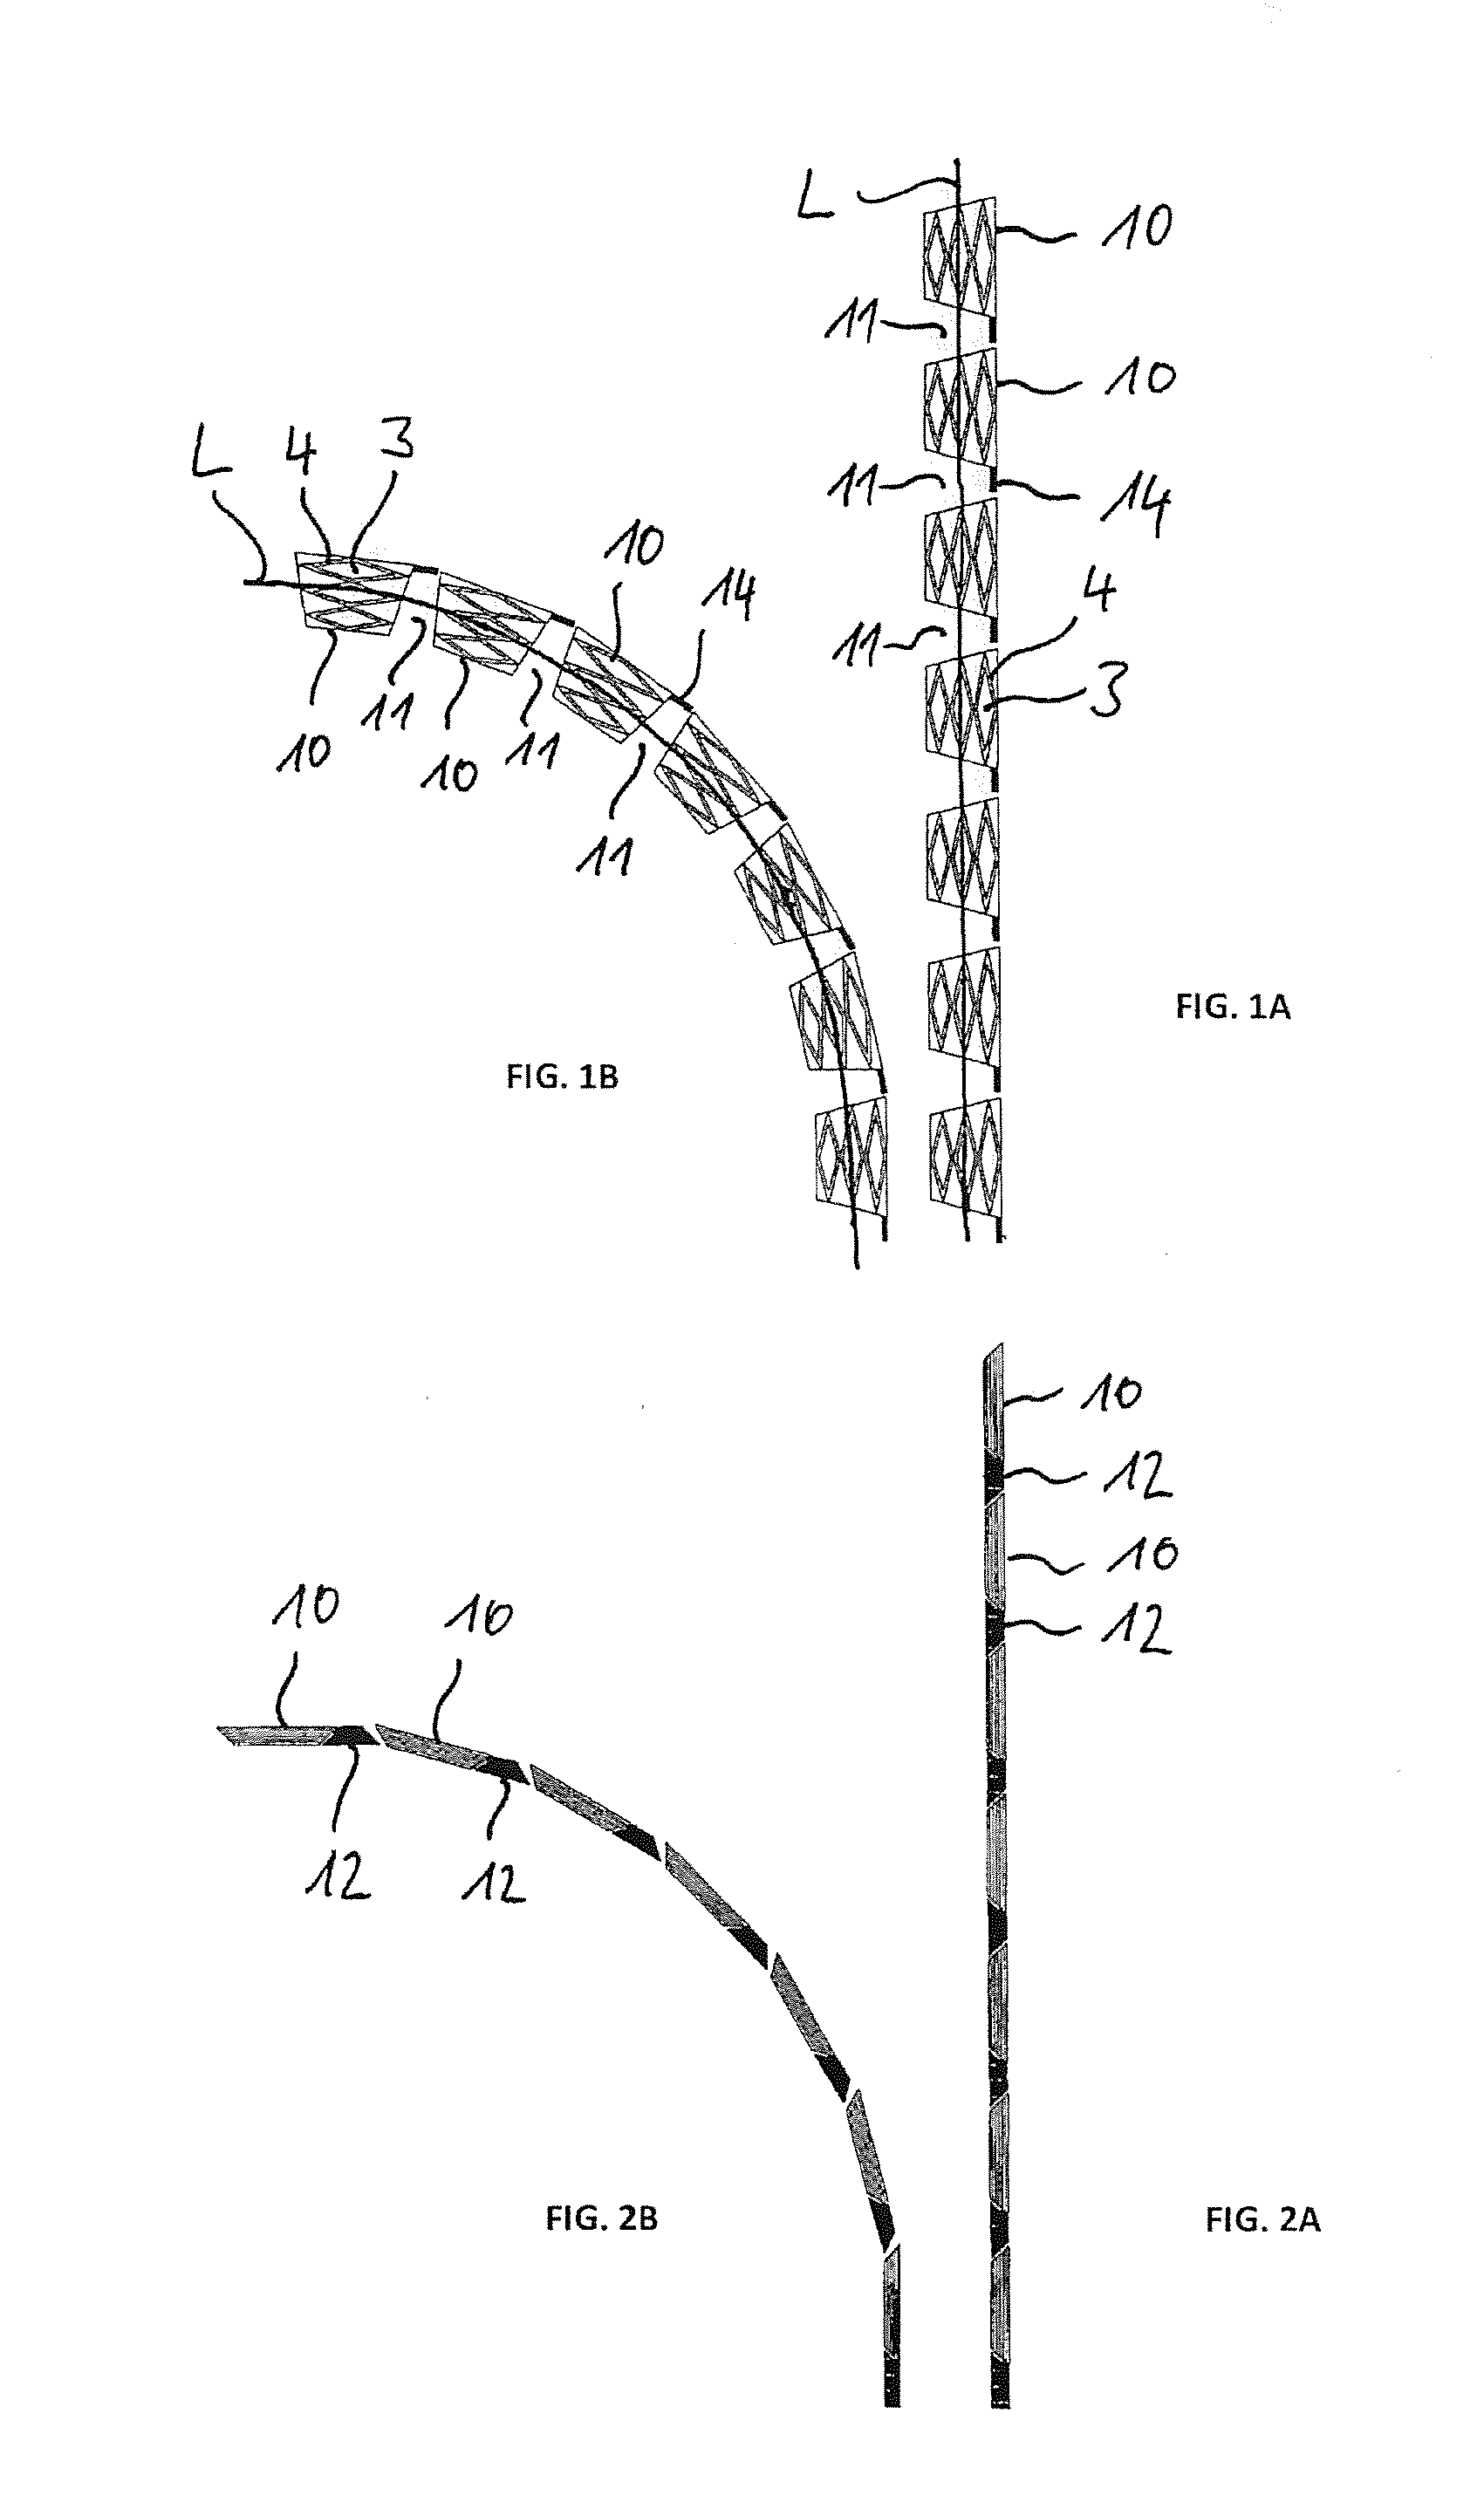 Arrangement for implanting stent elements in or around a hollow organ